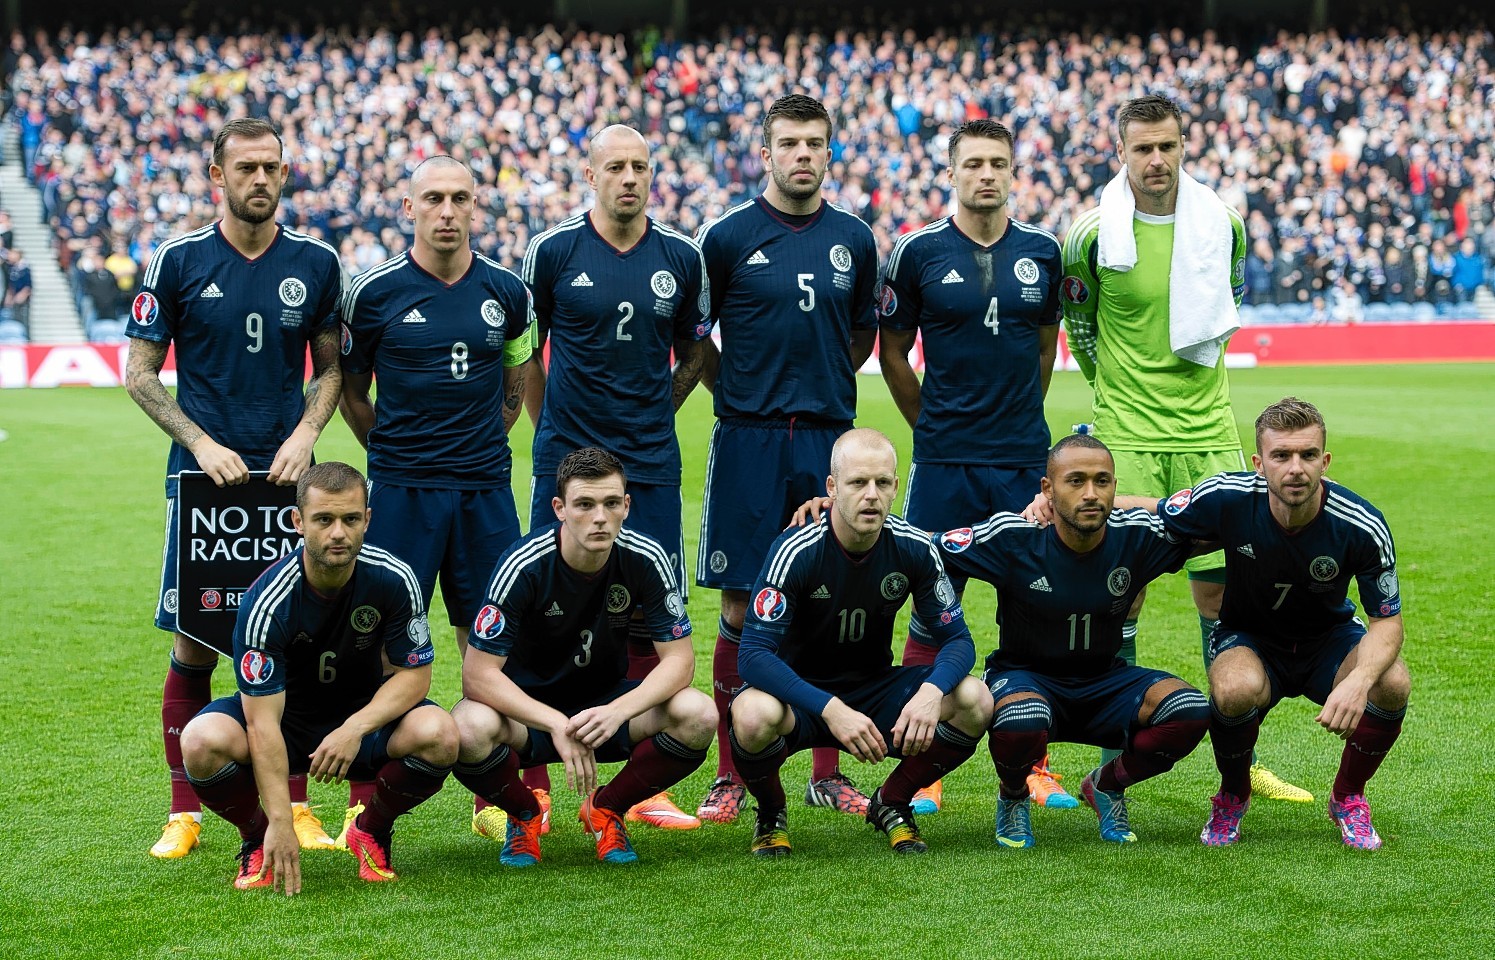 Scotland are looking to stop Poland from opening a six point gap between the teams